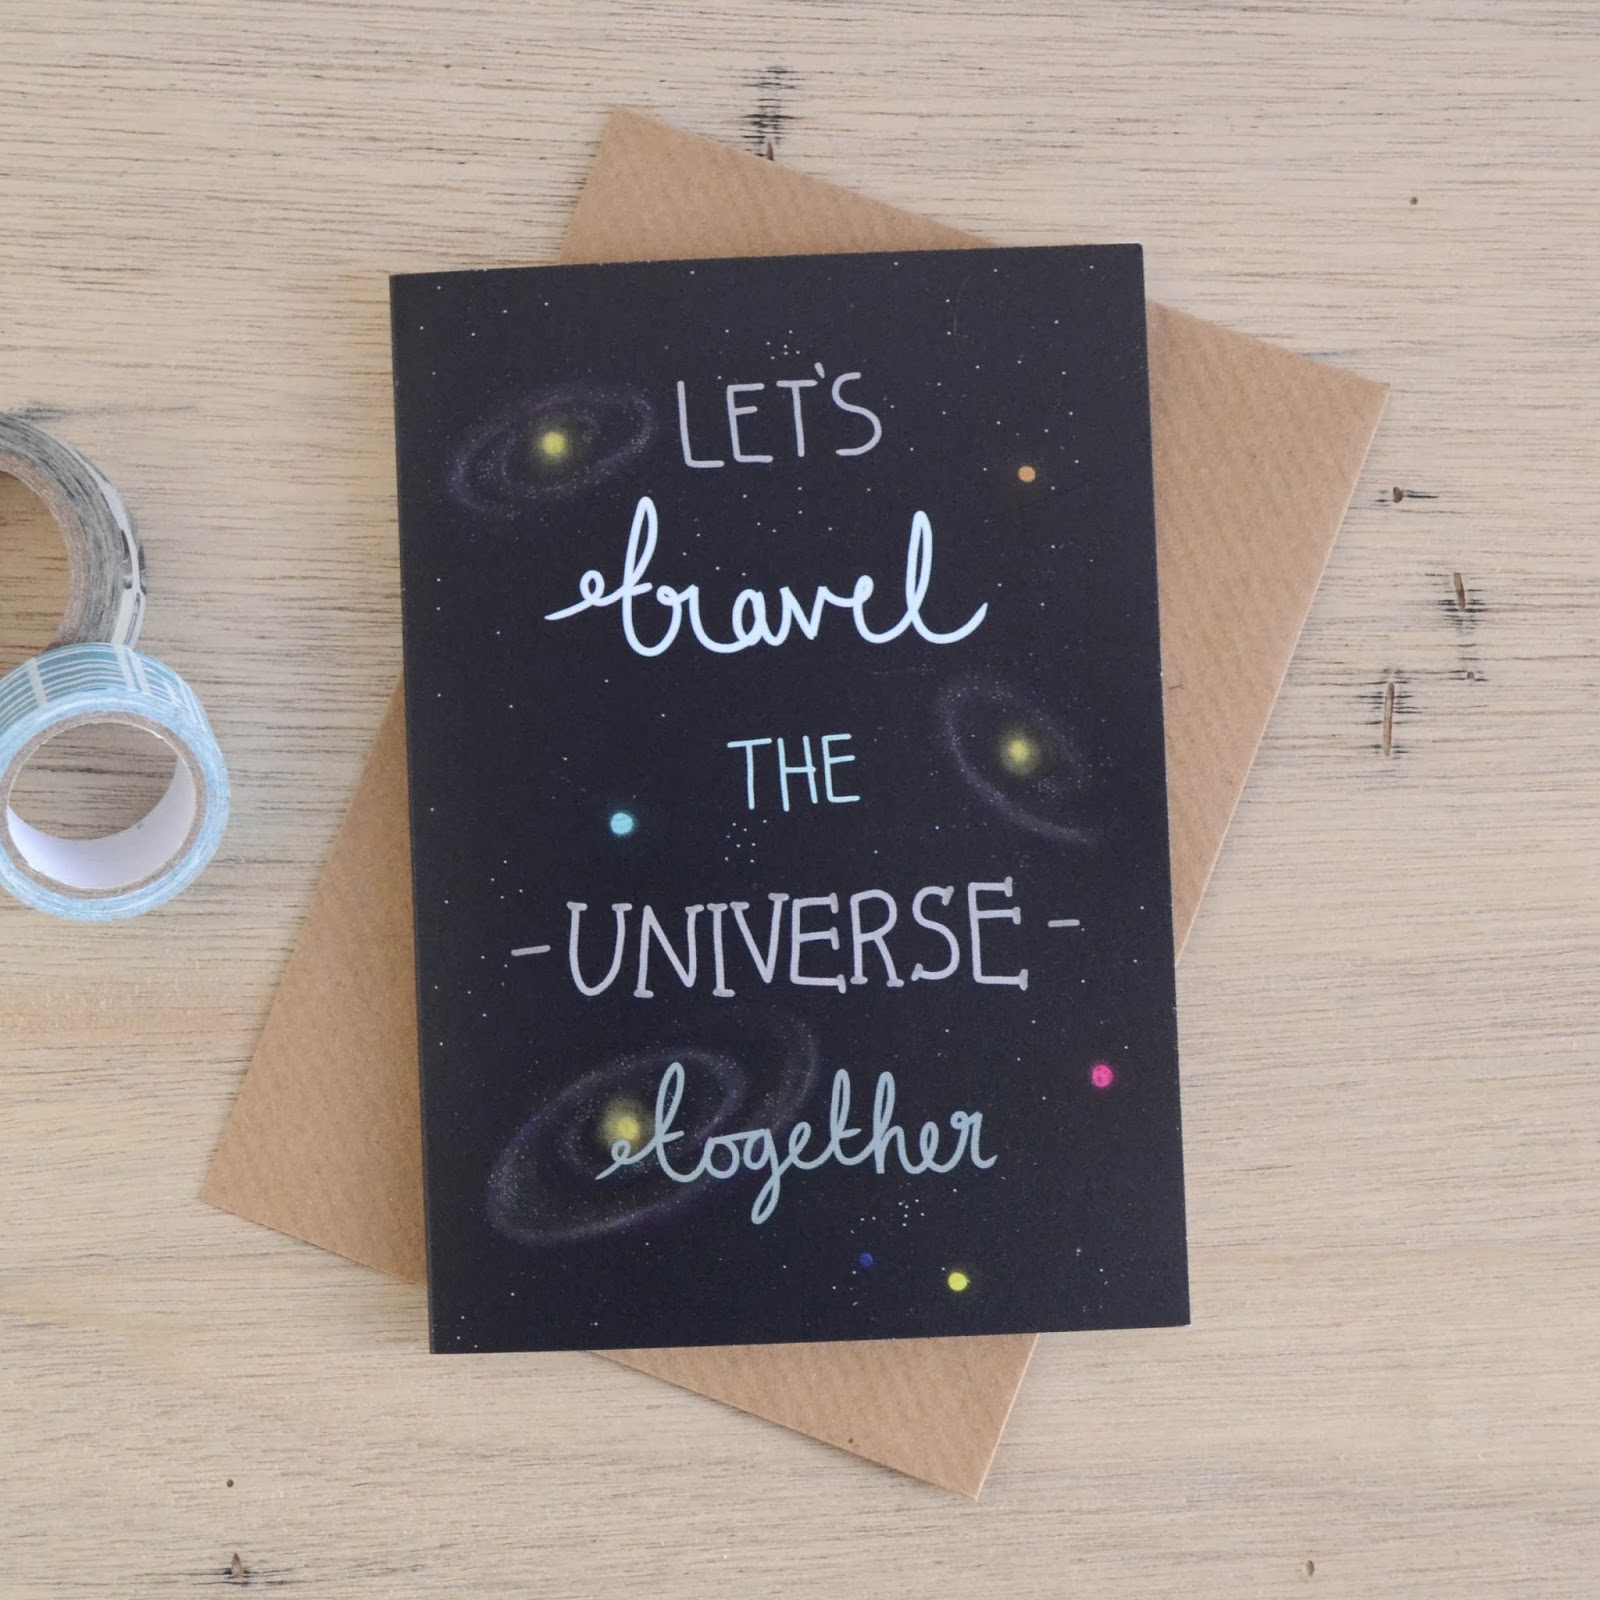 http://folksy.com/items/5725691-Let-s-Travel-The-Universe-Together